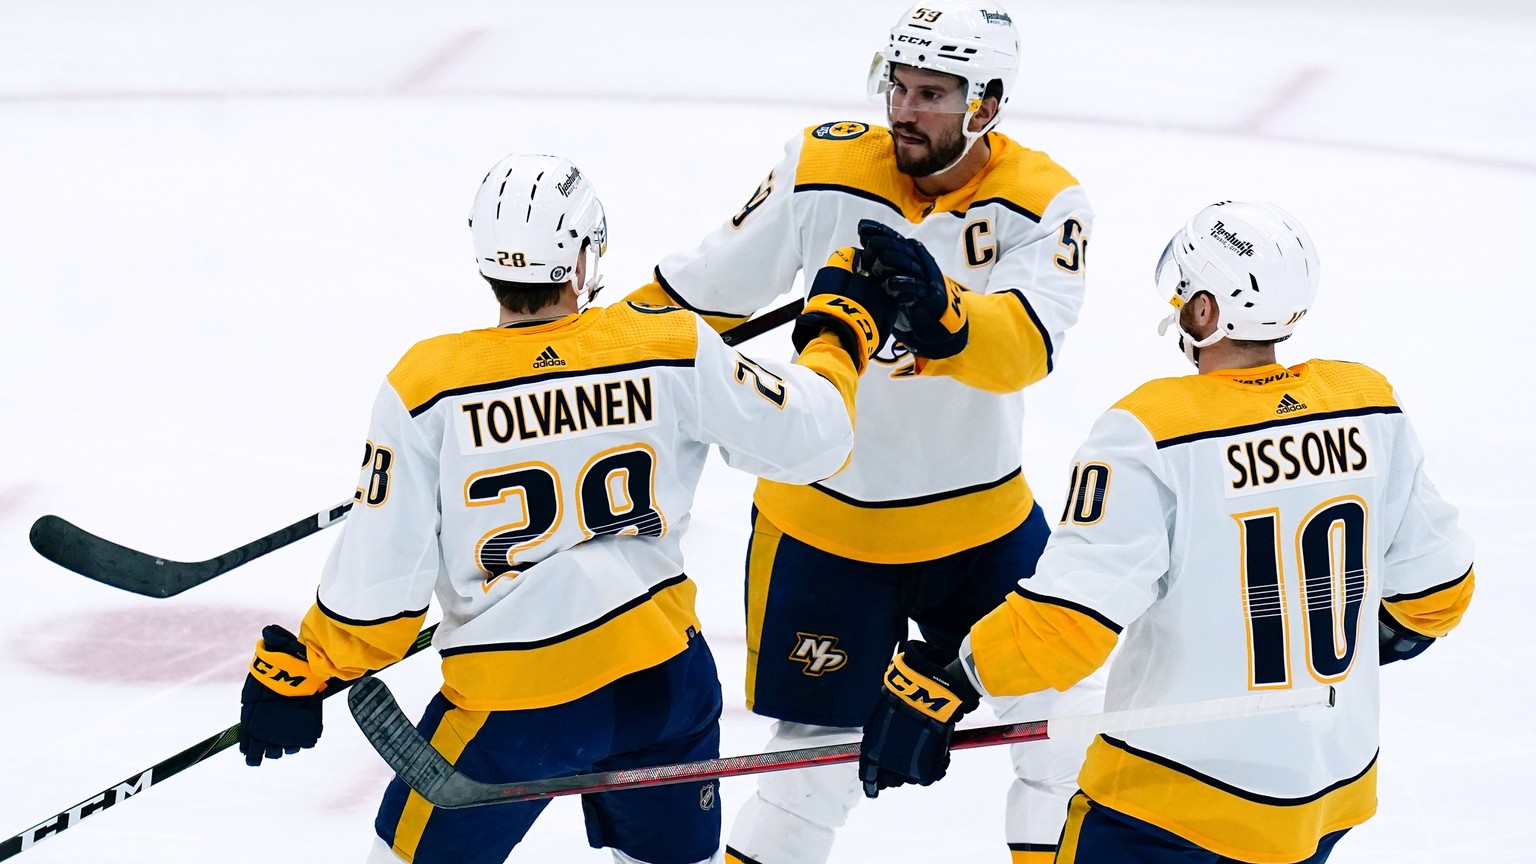 Nashville Predators right wing Eeli Tolvanen (28) celebrates his goal against the Arizona Coyotes with center Colton Sissons (10) and defenseman Roman Josi (59) during the first period of an NHL hocke ...